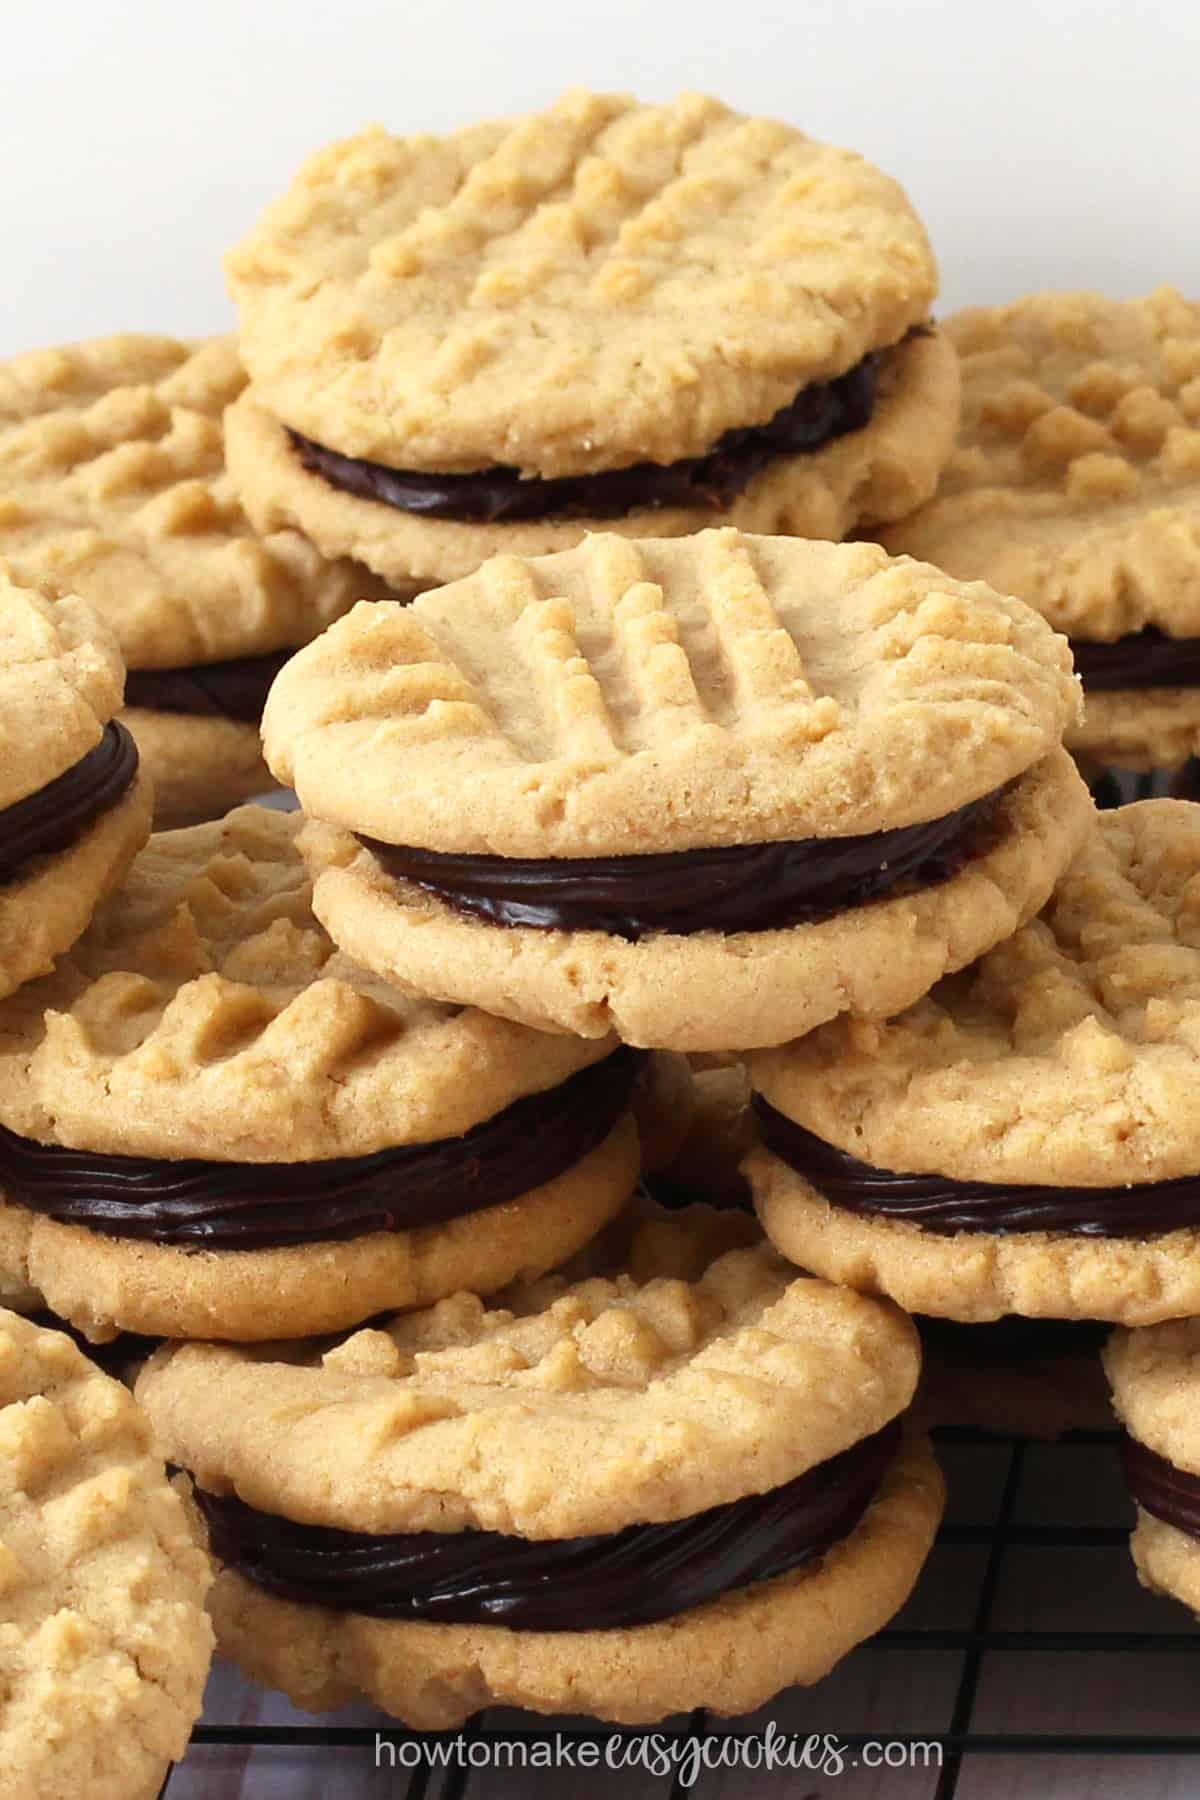 Peanut butter sandwich cookies filled with decadently rich and creamy chocolate ganache. 